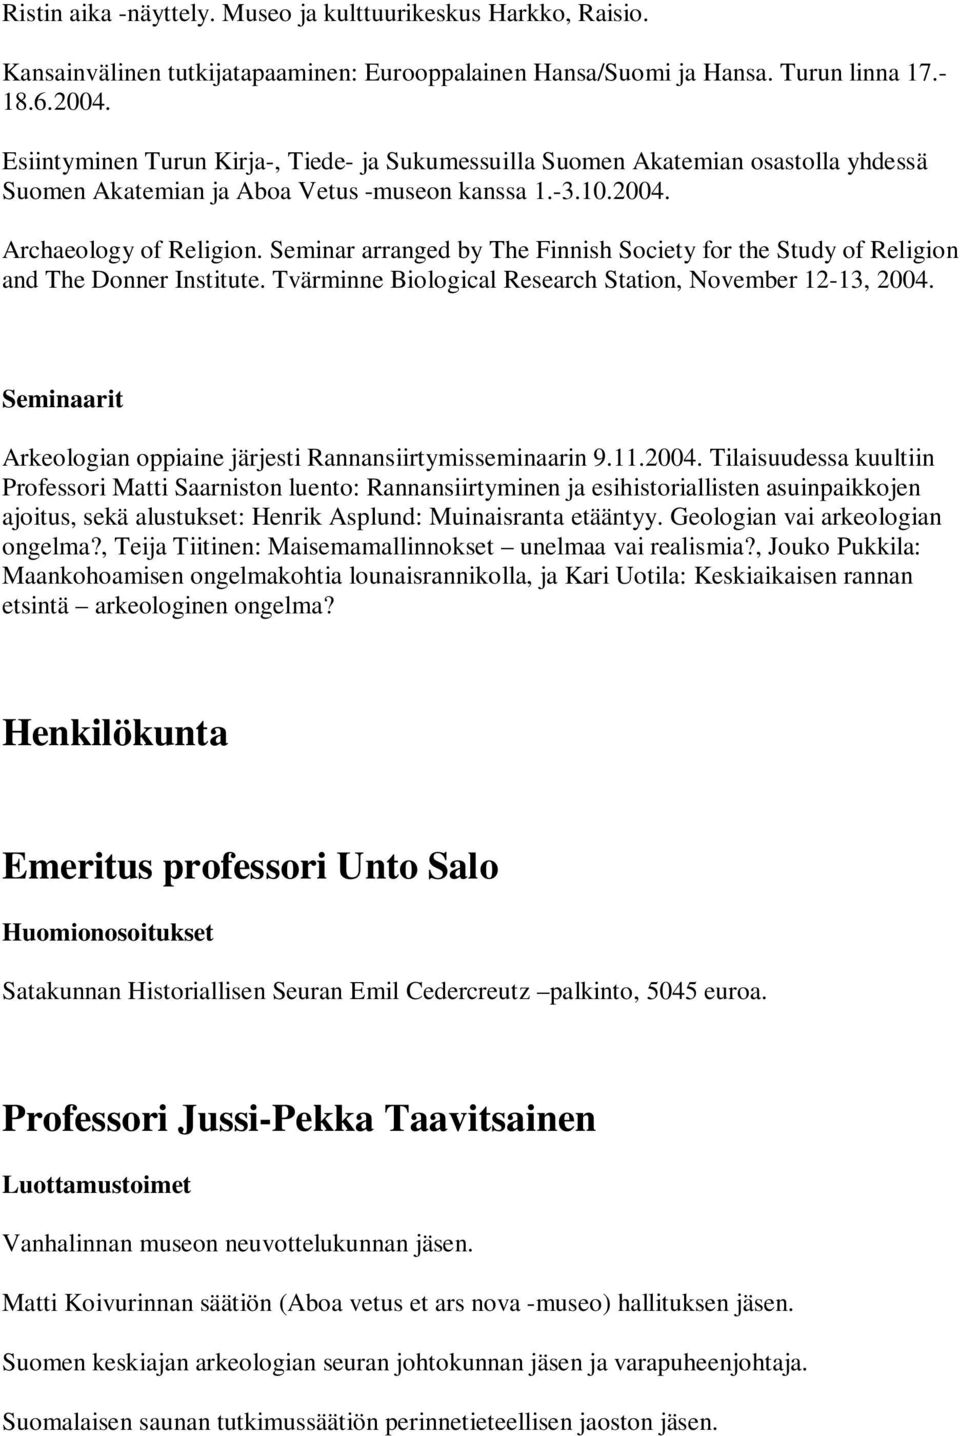 Seminar arranged by The Finnish Society for the Study of Religion and The Donner Institute. Tvärminne Biological Research Station, November 12-13, 2004.